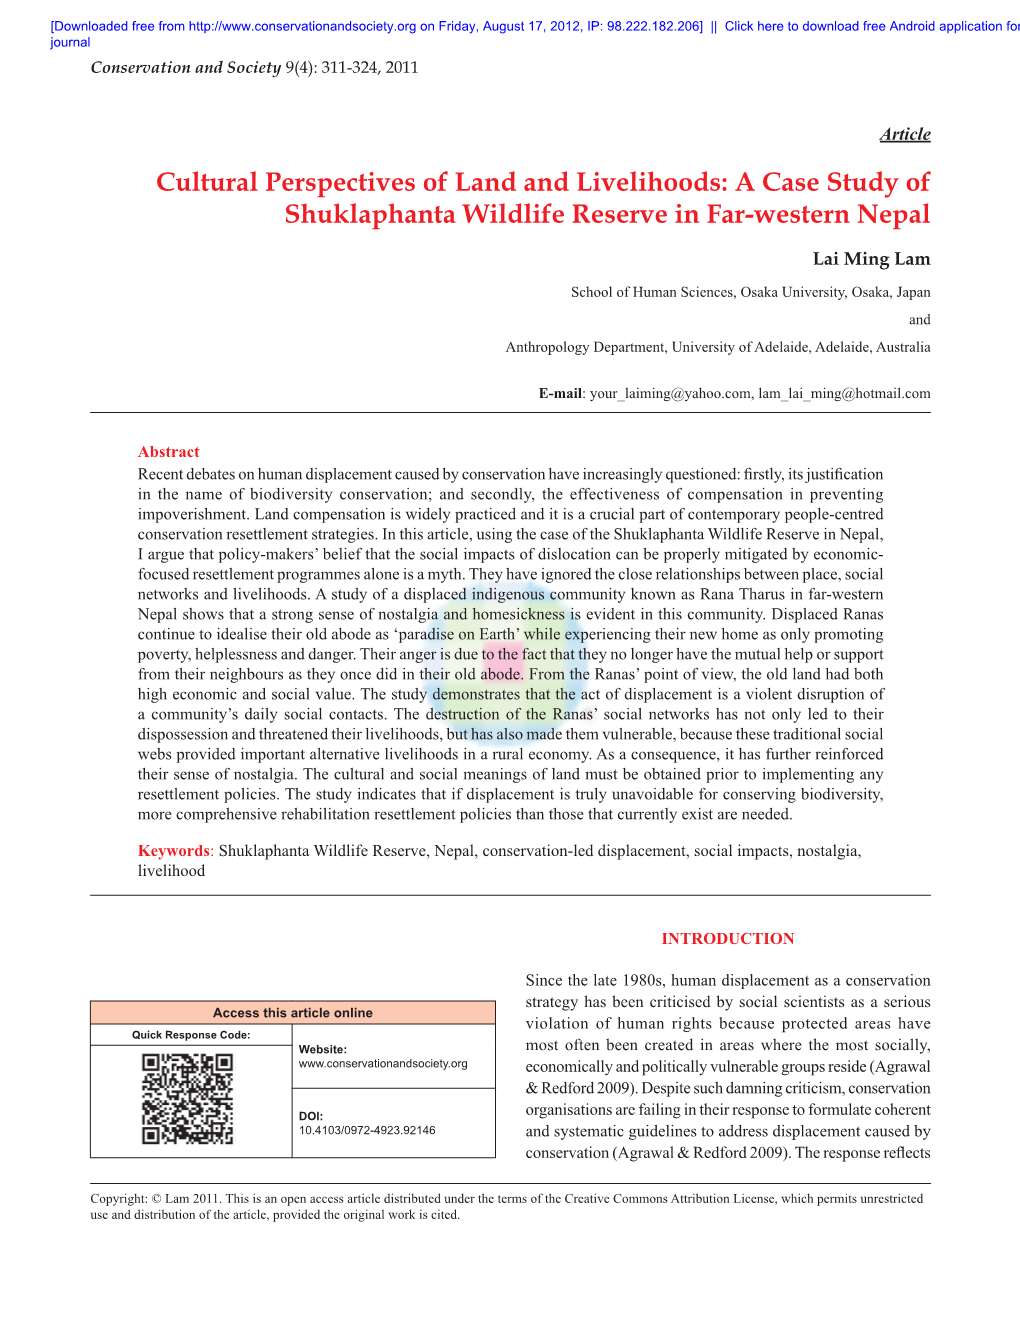 Cultural Perspectives of Land and Livelihoods: a Case Study of Shuklaphanta Wildlife Reserve in Far-Western Nepal